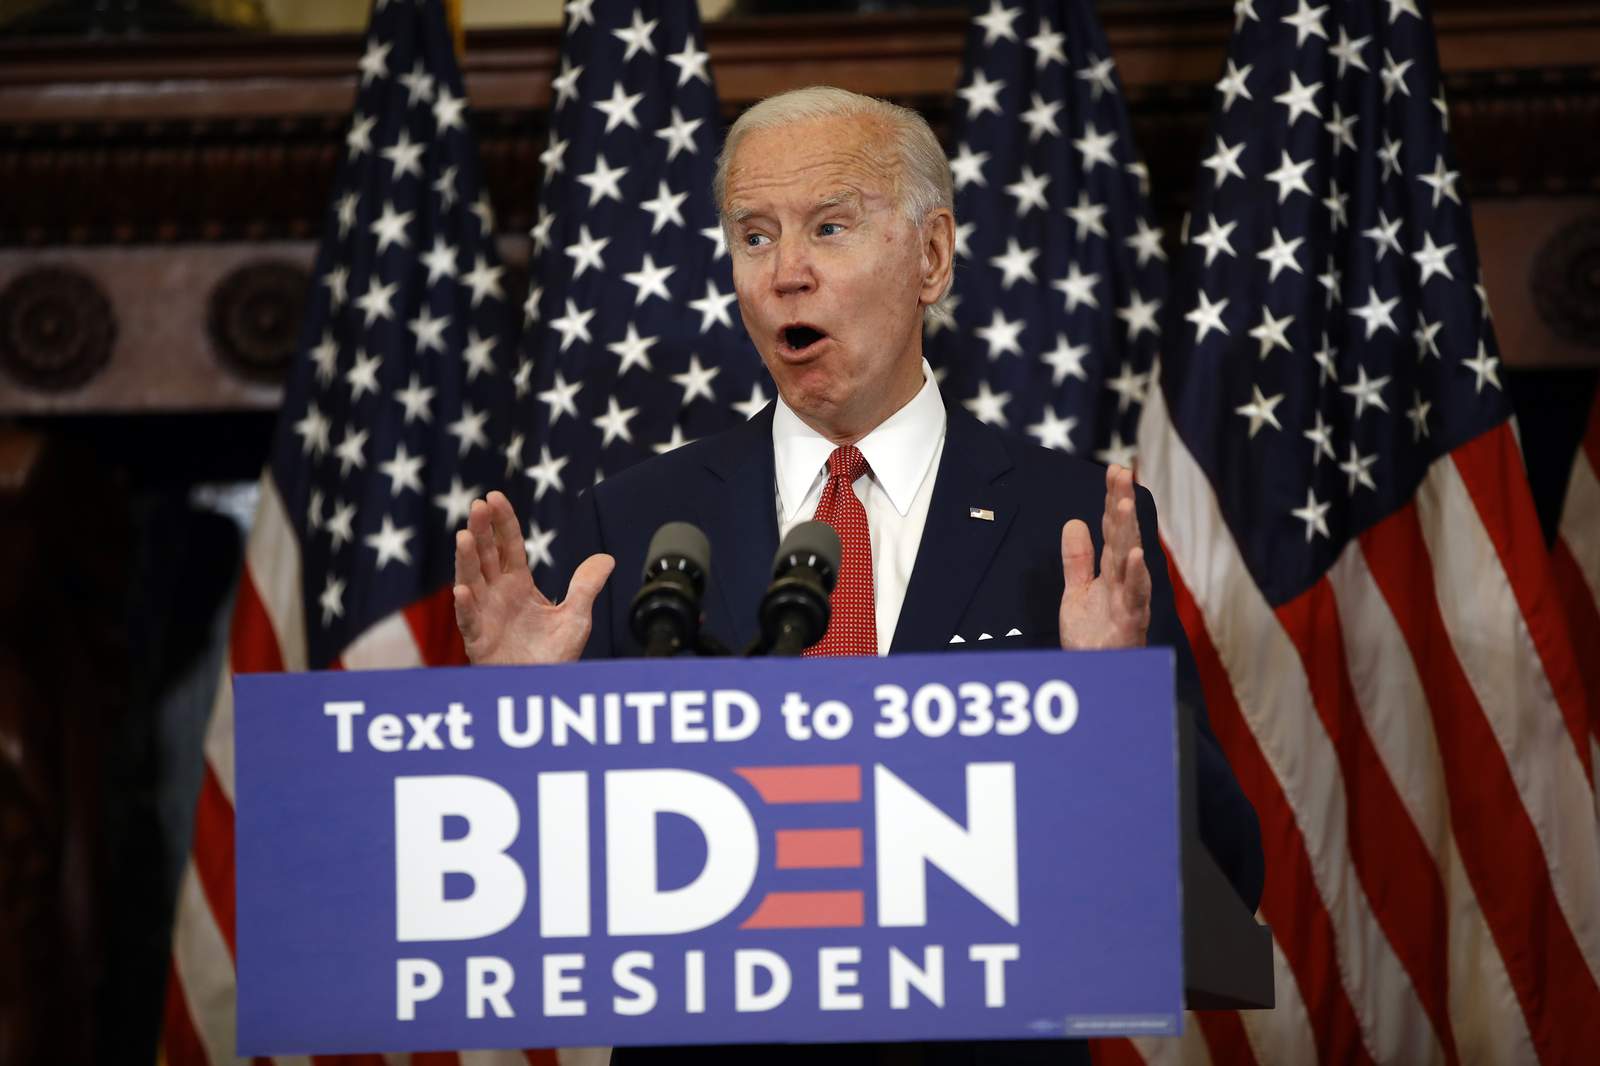 Hate just hides: Biden vows to take on systematic racism